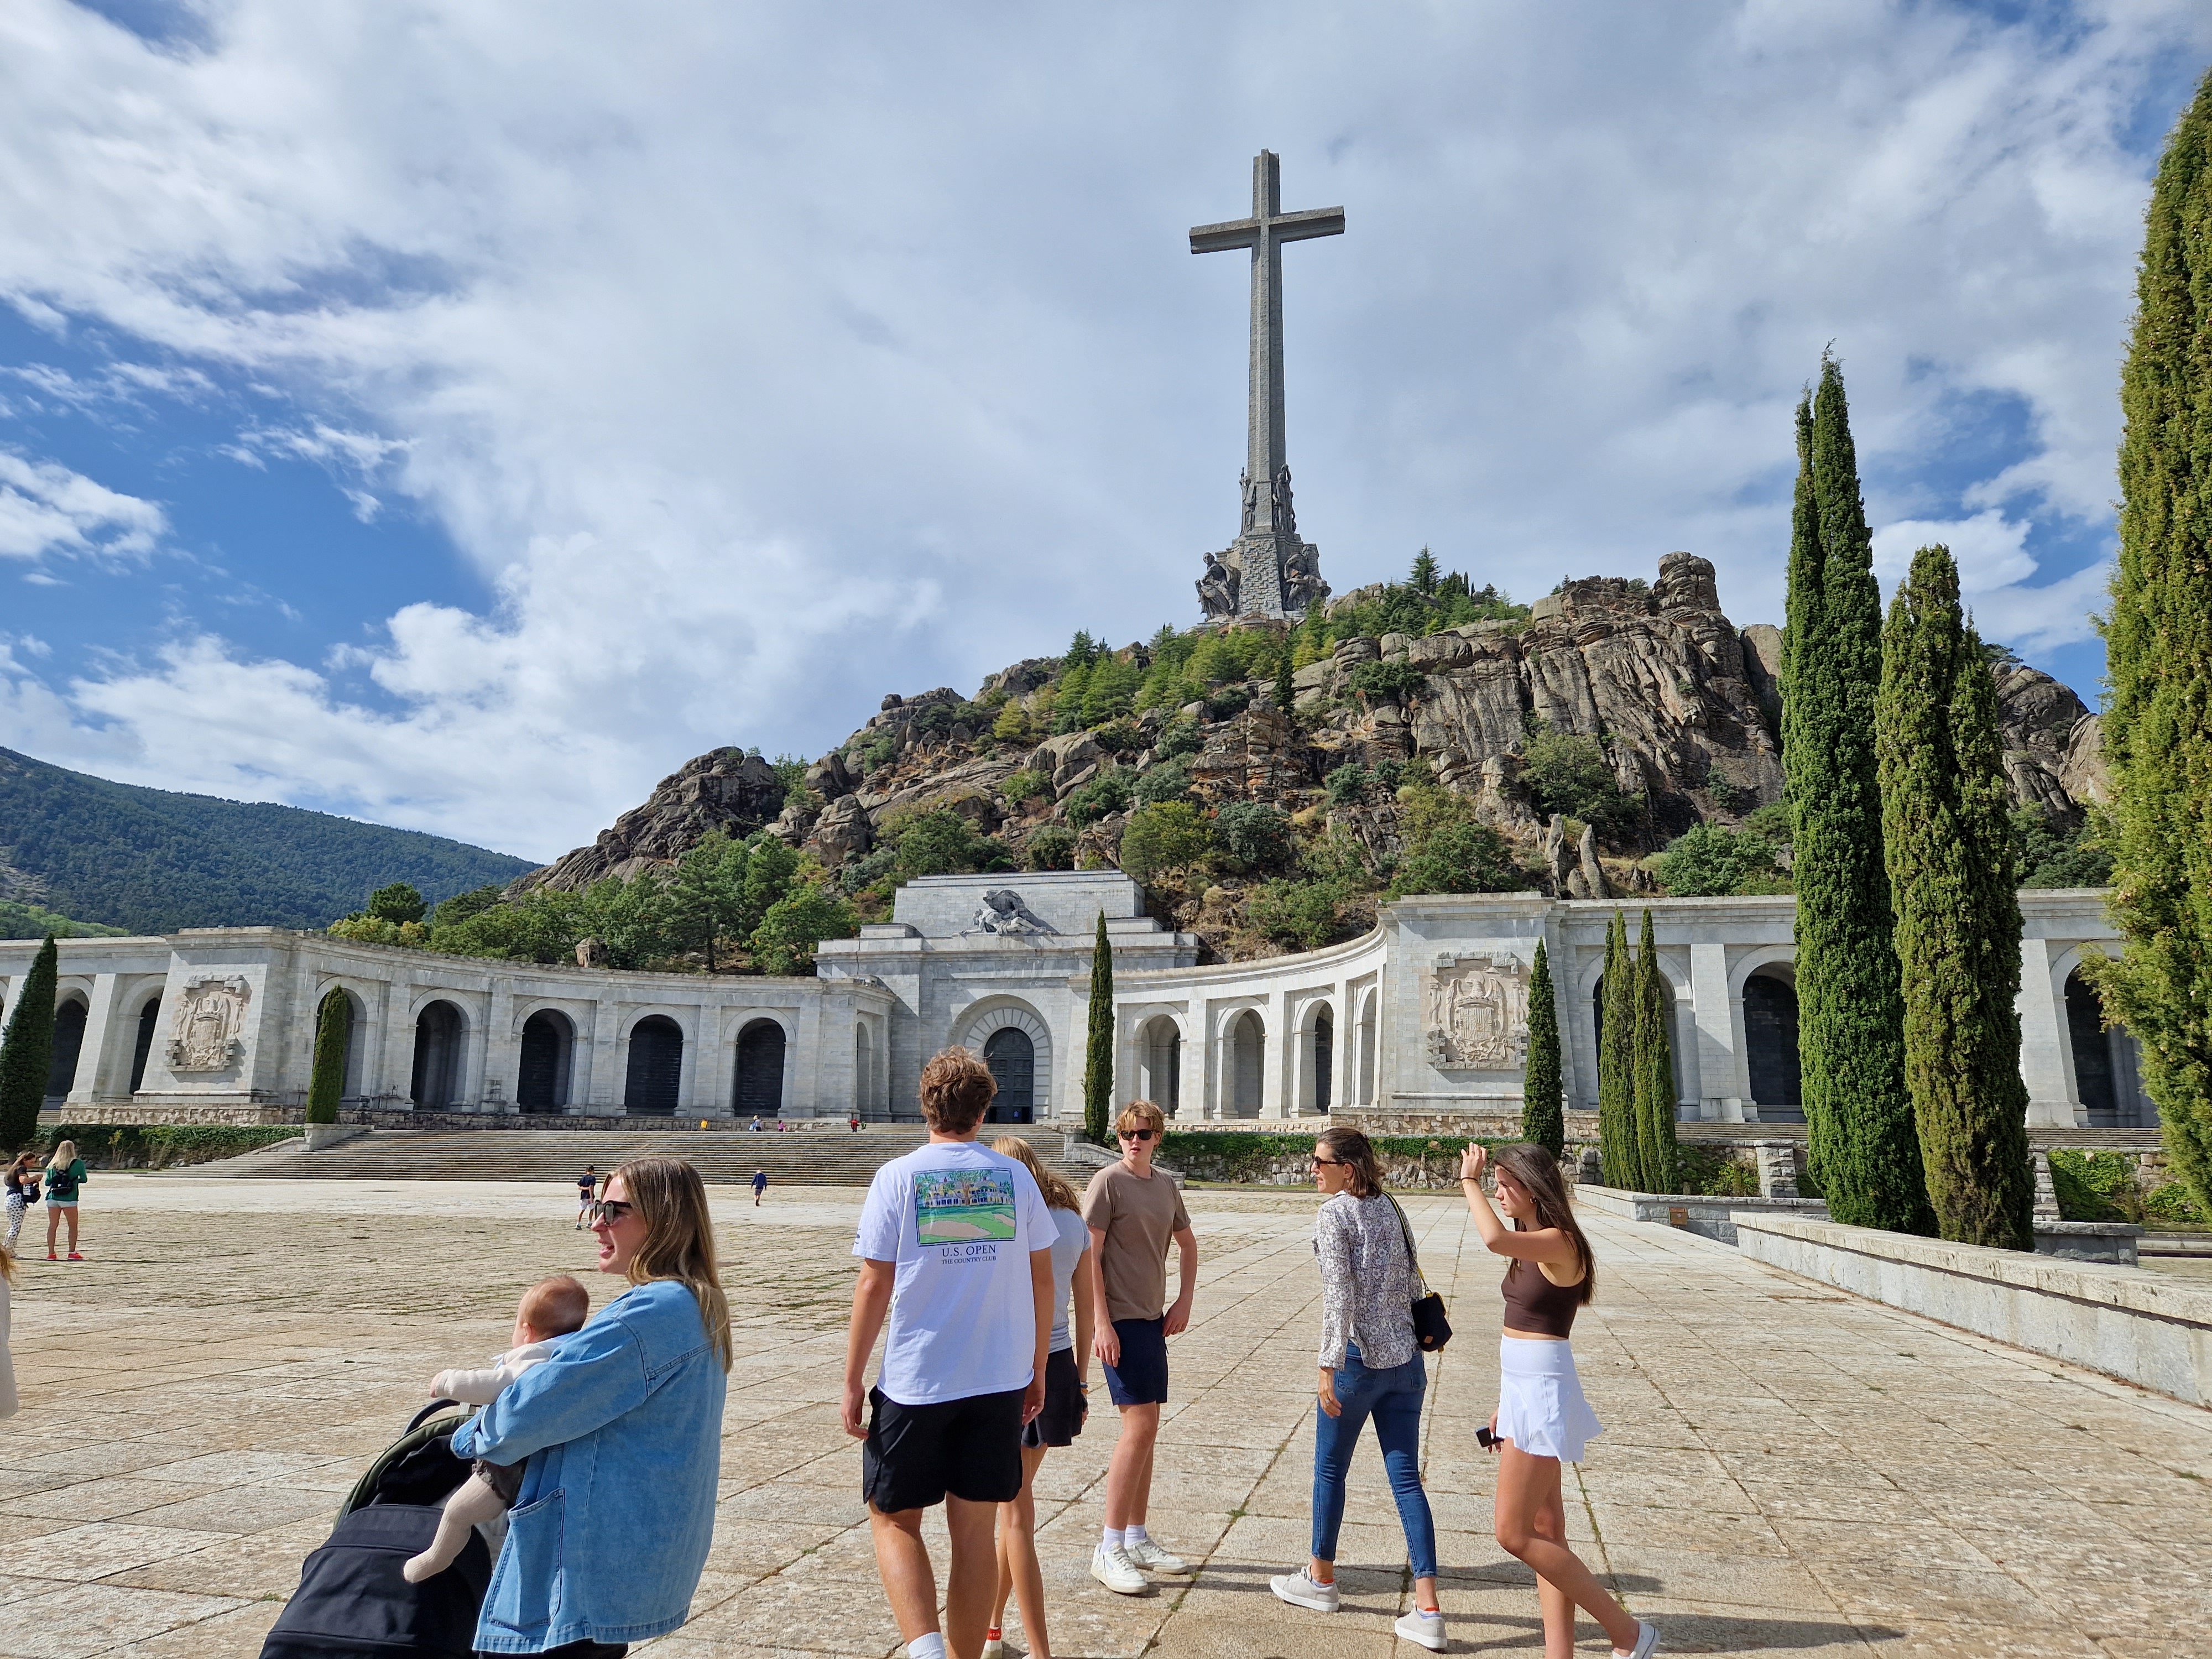 Proctor Academy students learn about the Francisco Franco regime